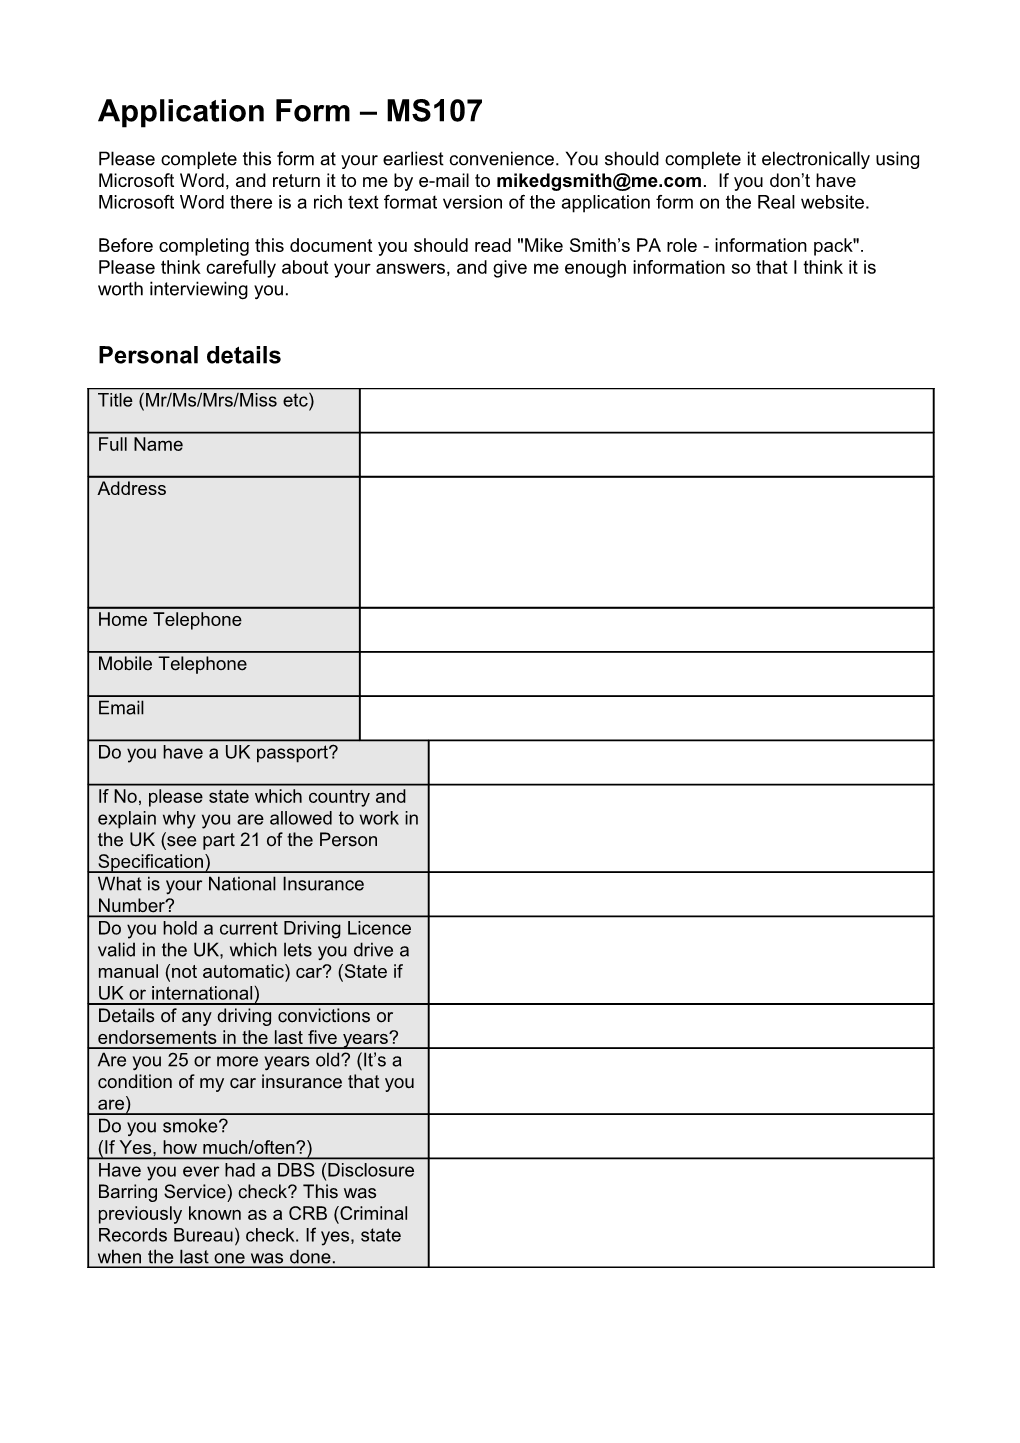 Application Form MS107